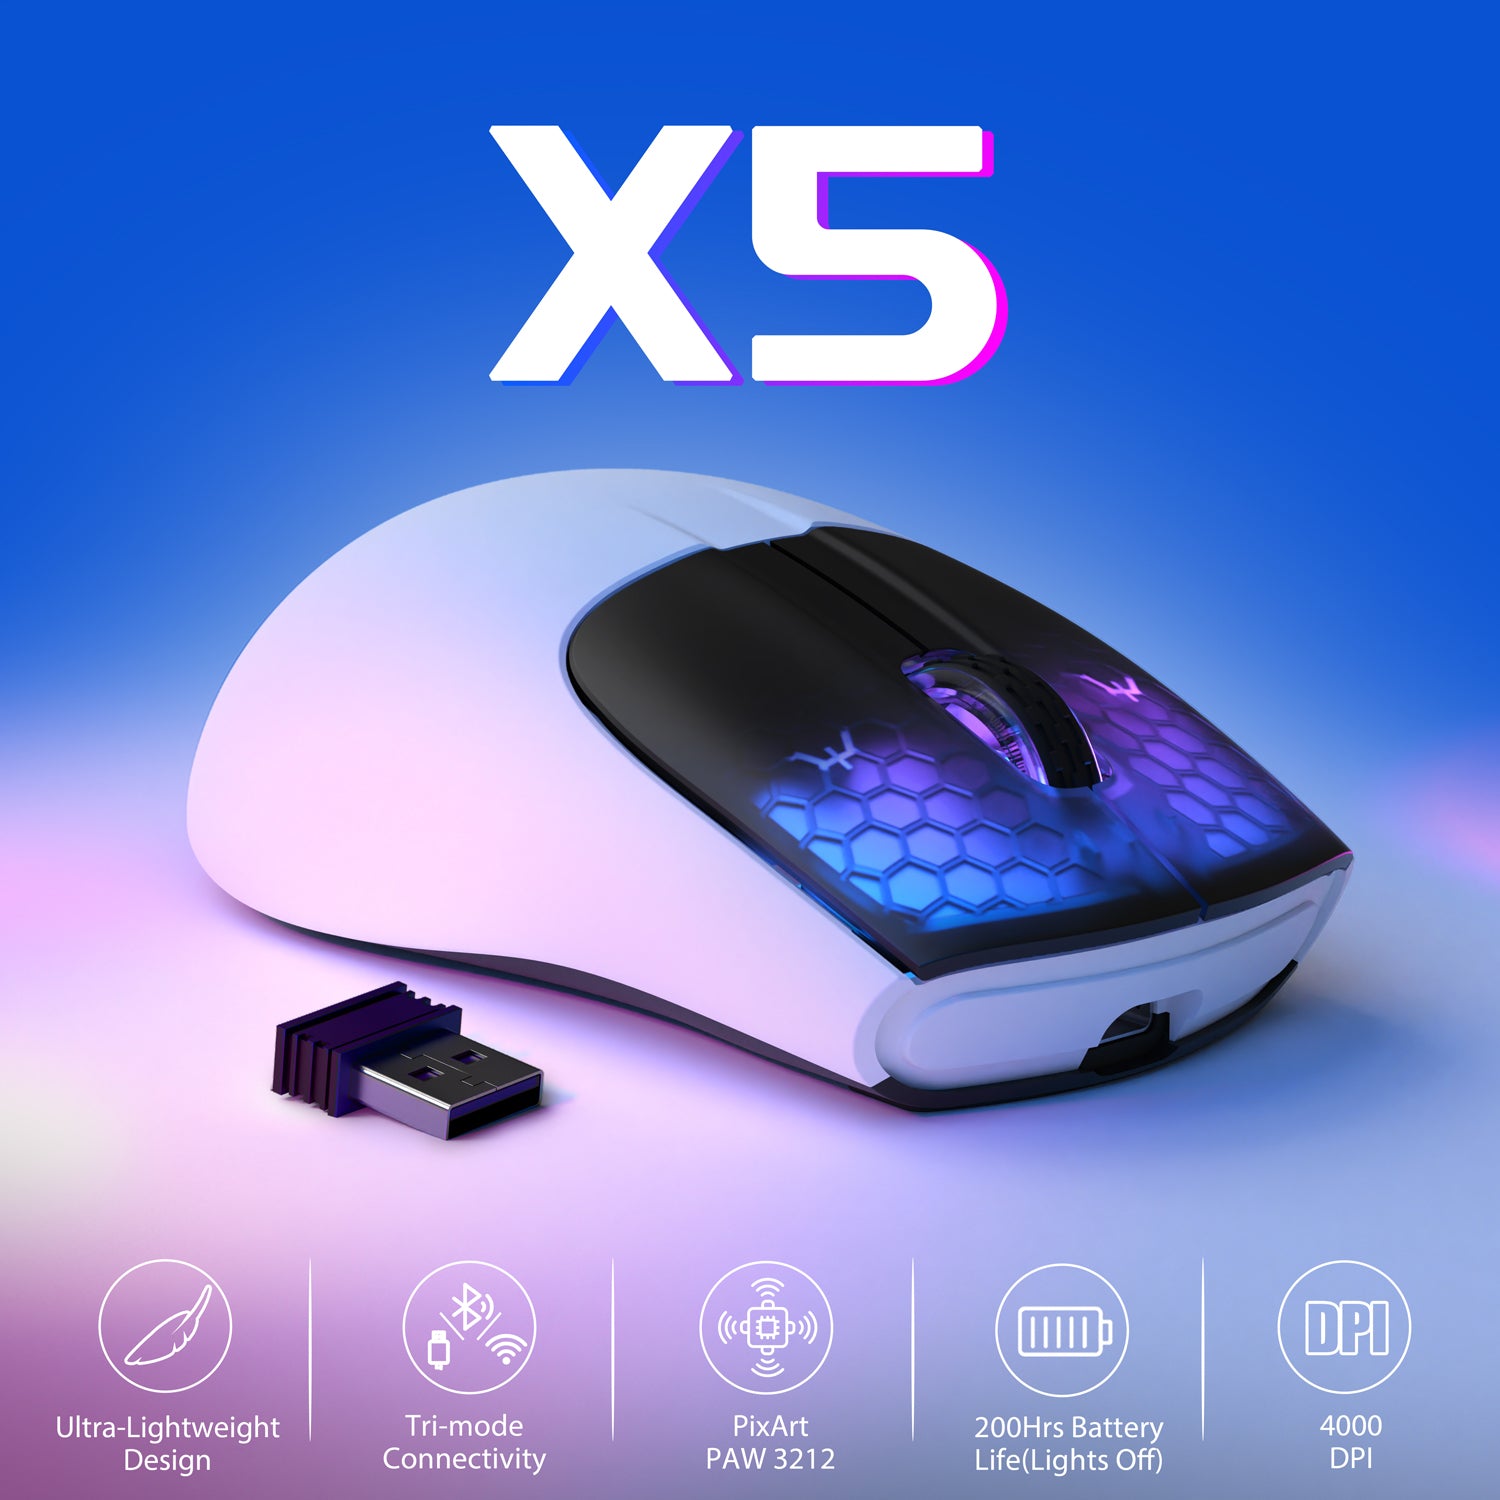 ATTACK SAHRK X5 Wireless Gaming Mouse